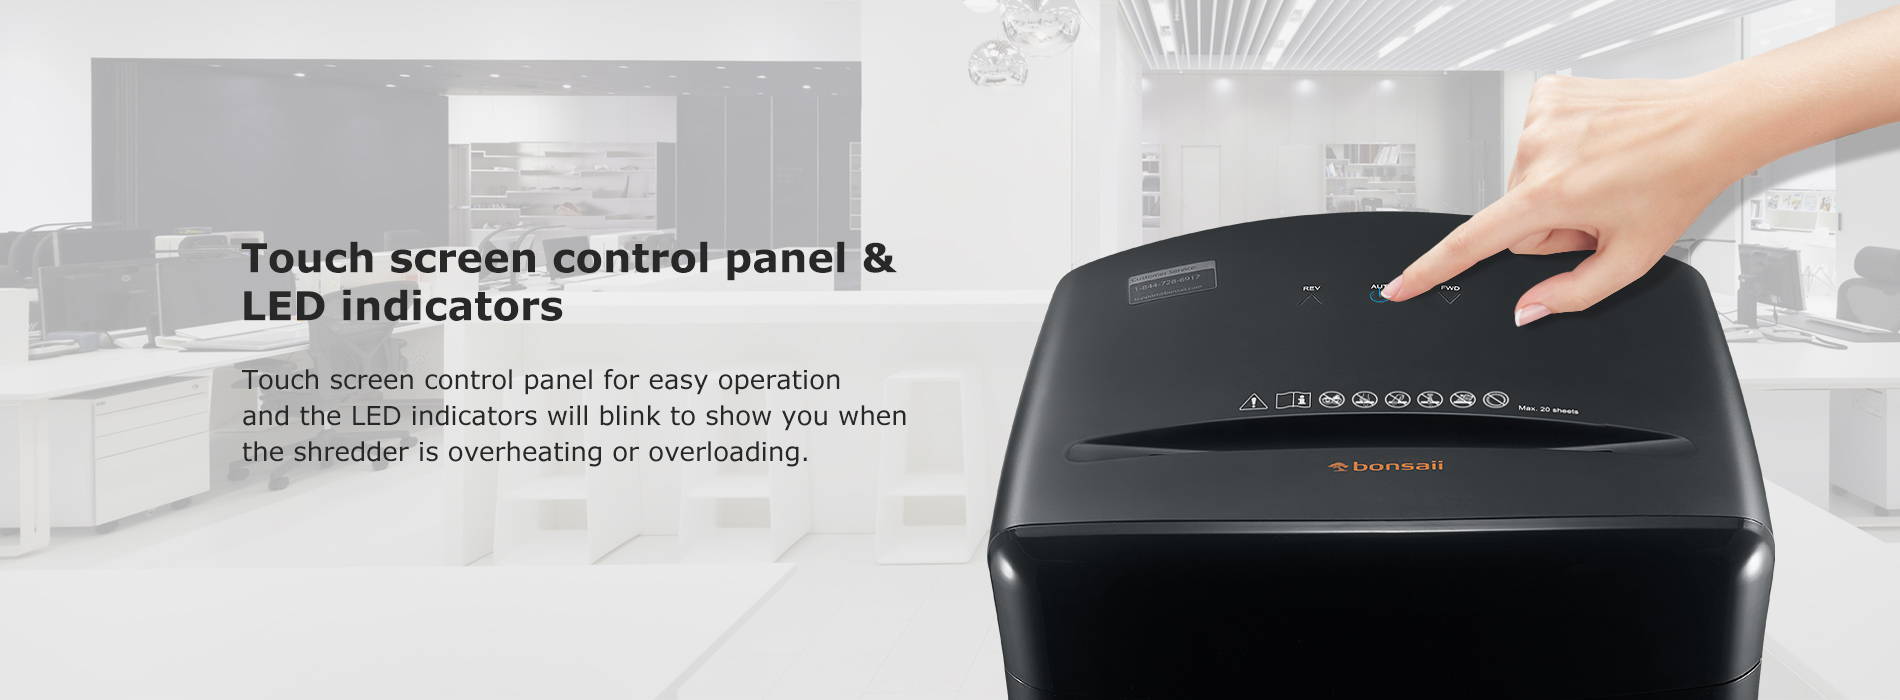 Touch screen control panel & LED indicators Touch screen control panel for easy operation and the LED indicators will blink to show you when the shredder is overheating or overloading.